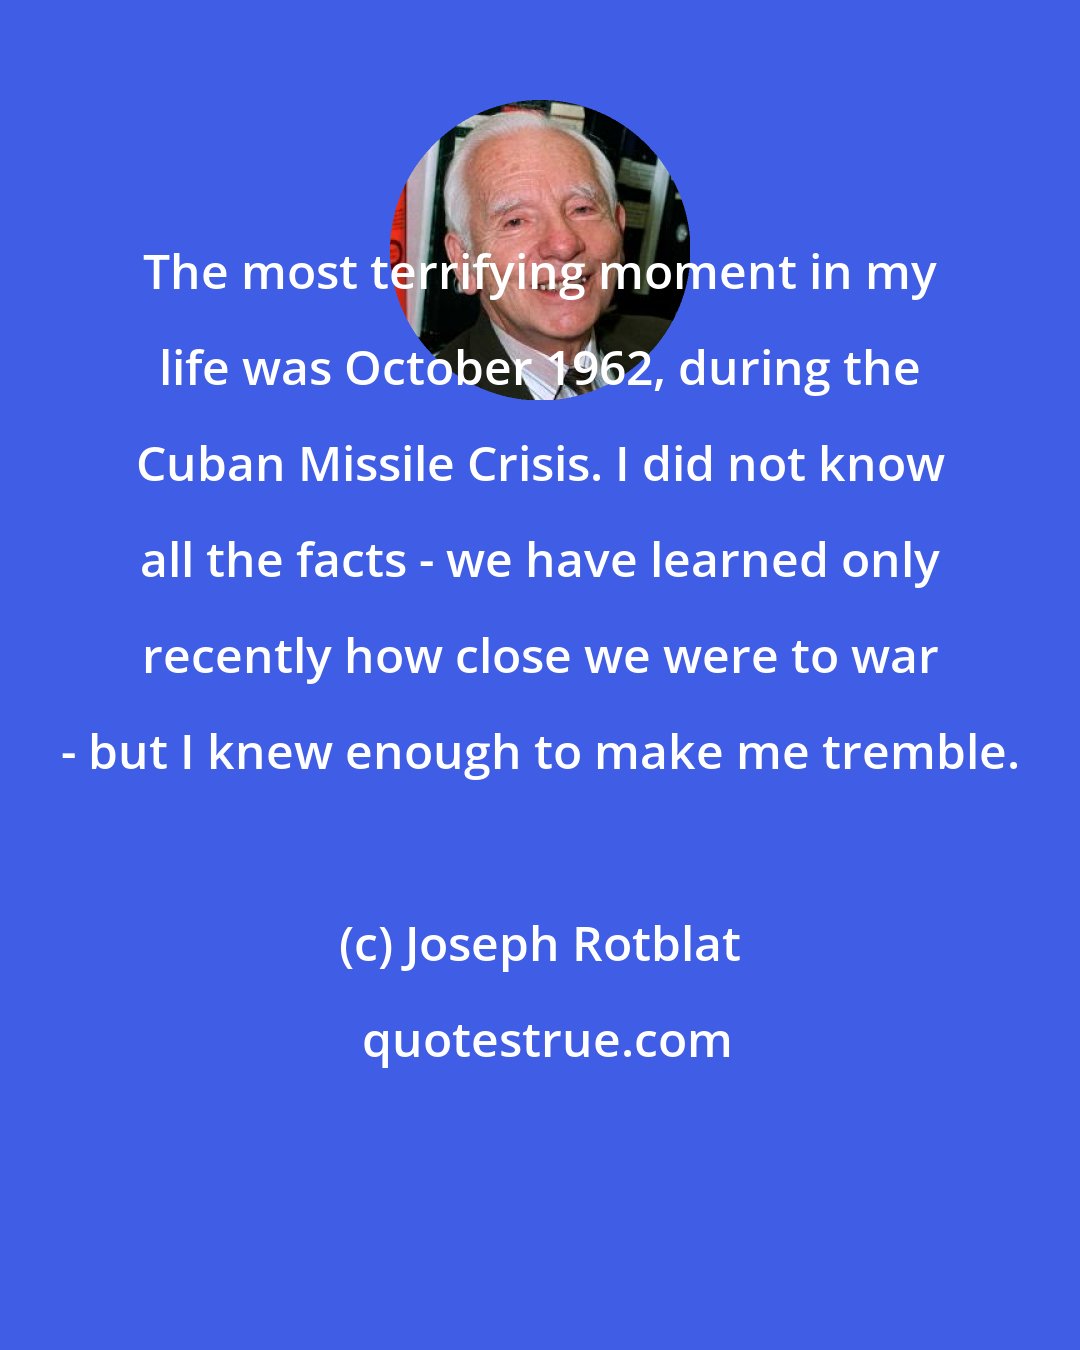 Joseph Rotblat: The most terrifying moment in my life was October 1962, during the Cuban Missile Crisis. I did not know all the facts - we have learned only recently how close we were to war - but I knew enough to make me tremble.